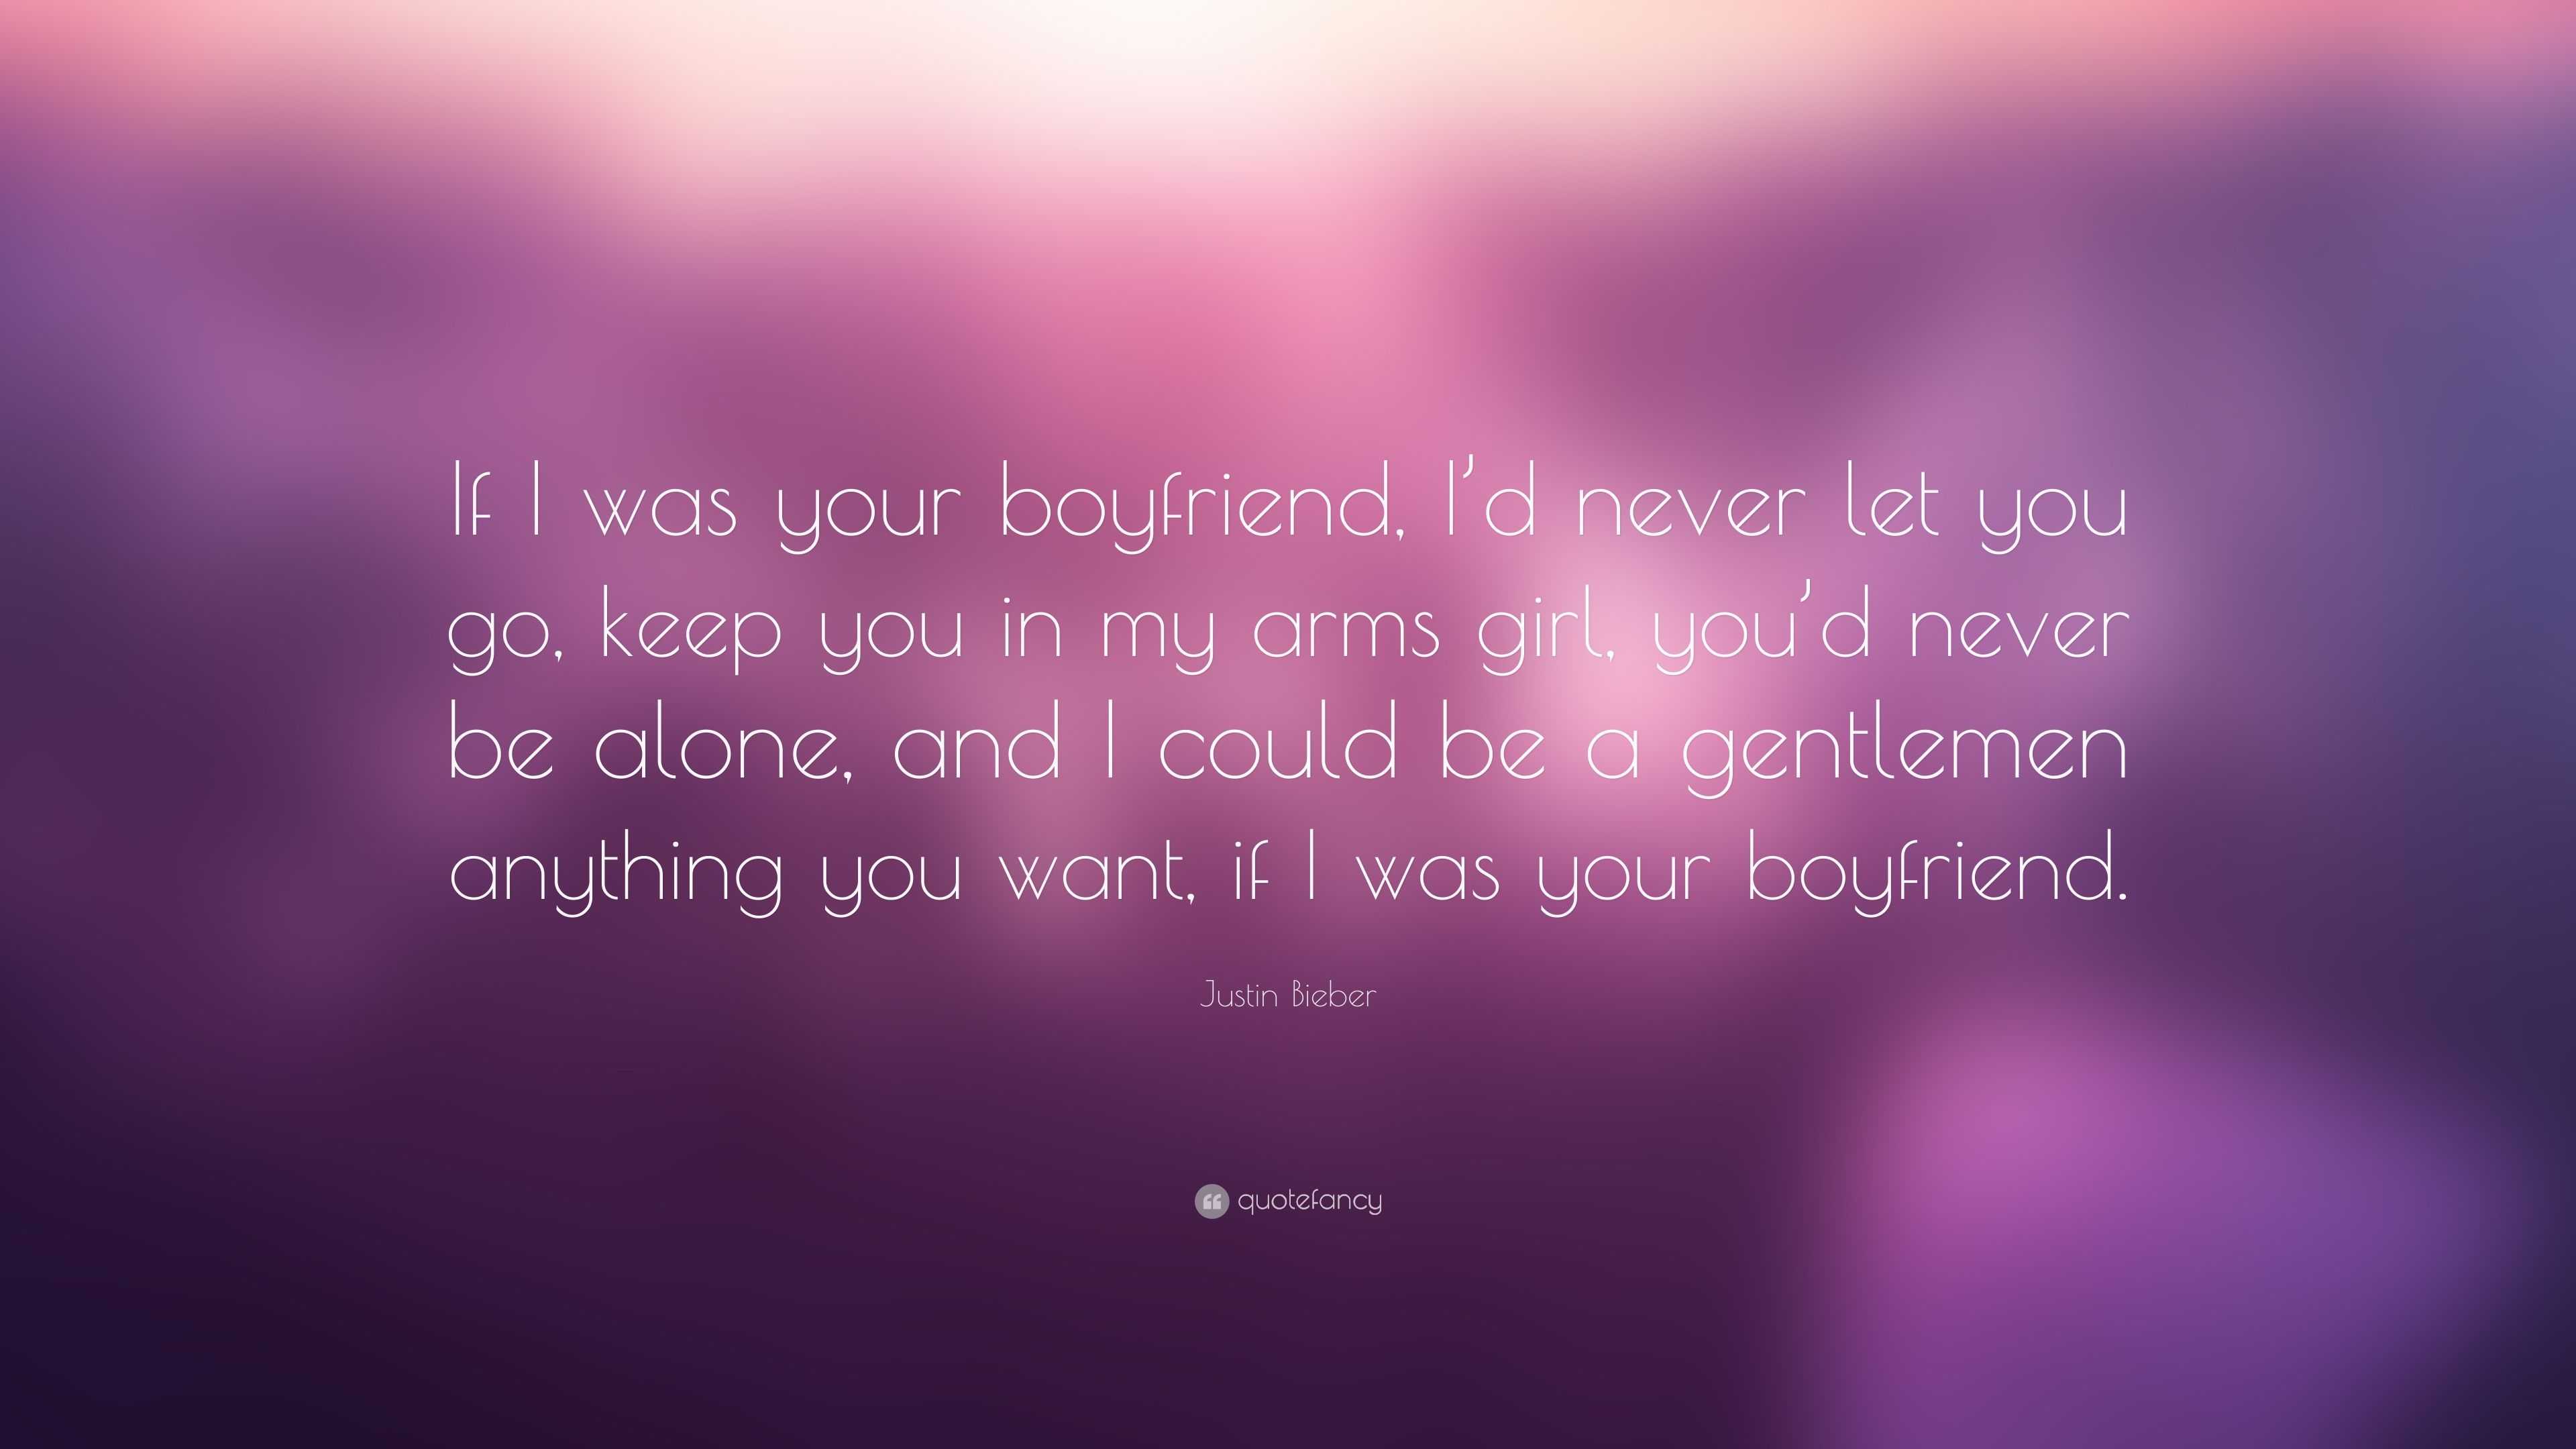 If I Were Your Boyfriend Justin Bieber Quote: “If I was your boyfriend, I'd never let you go, keep  you in my arms girl, you'd never be alone, and I could be a gentleme...”